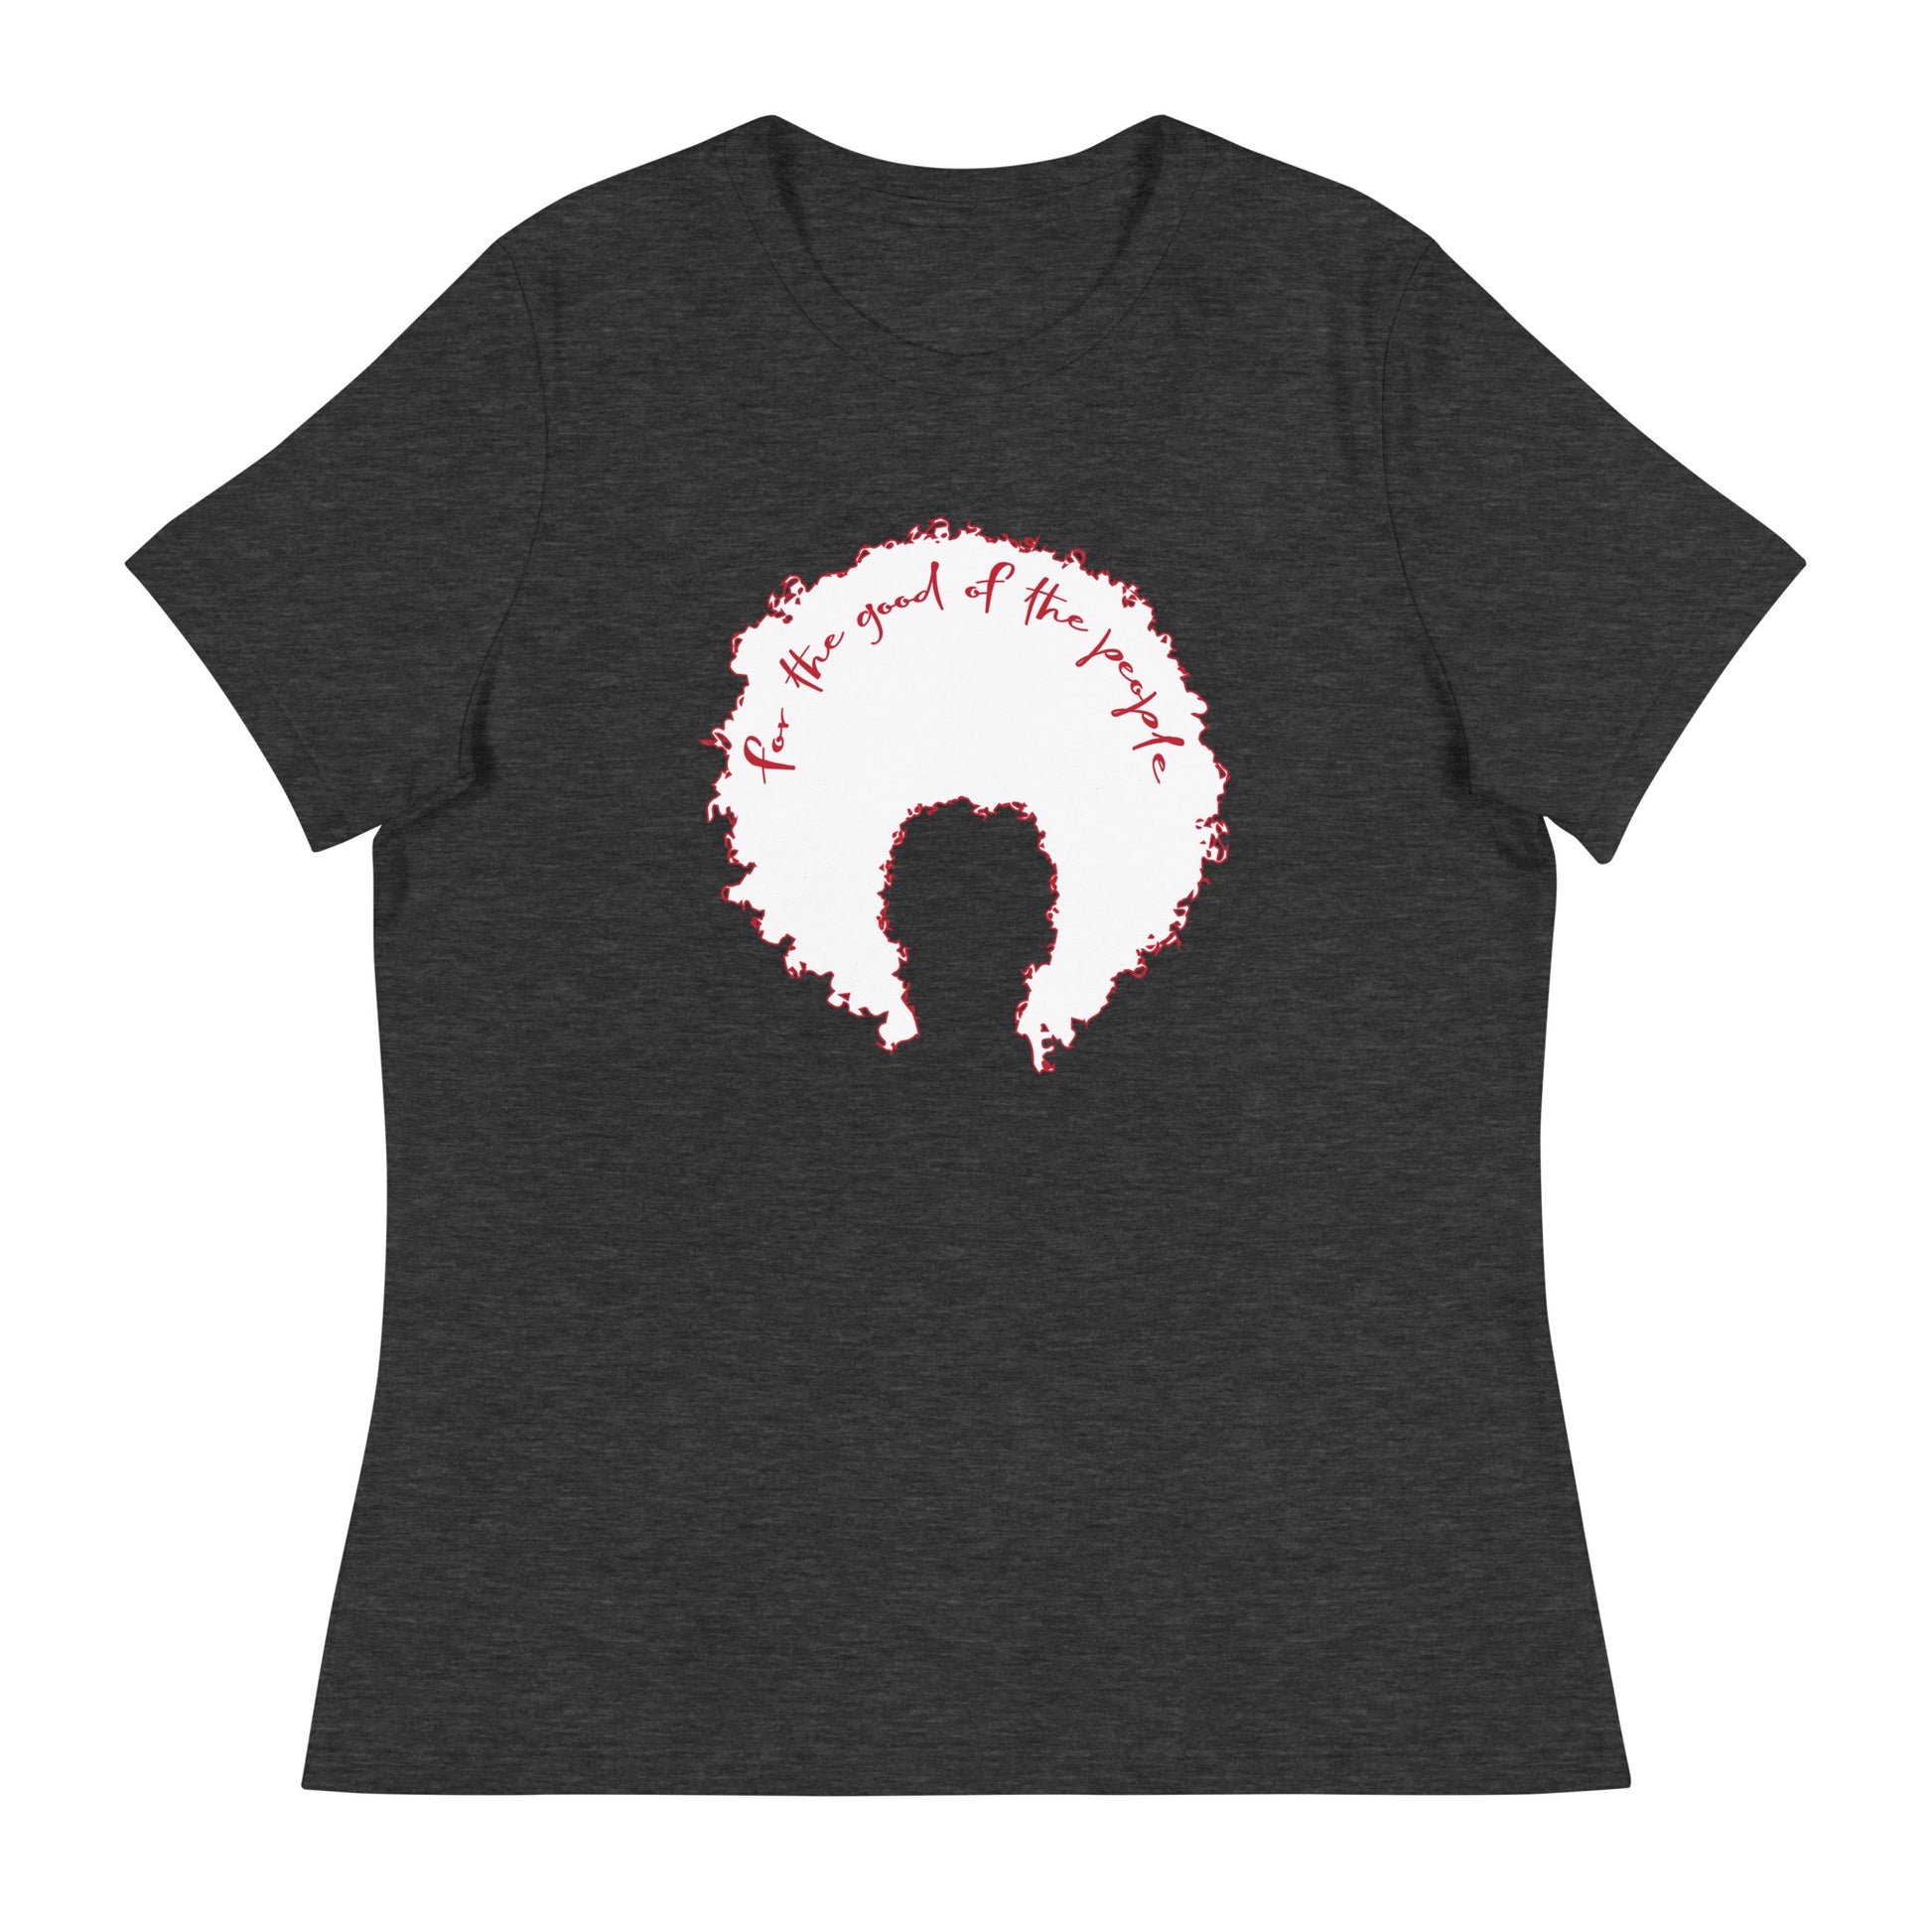 Dark heather gray women's tee with white afro graphic trimmed in red with for the good of the people in red on the inside top of the afro.